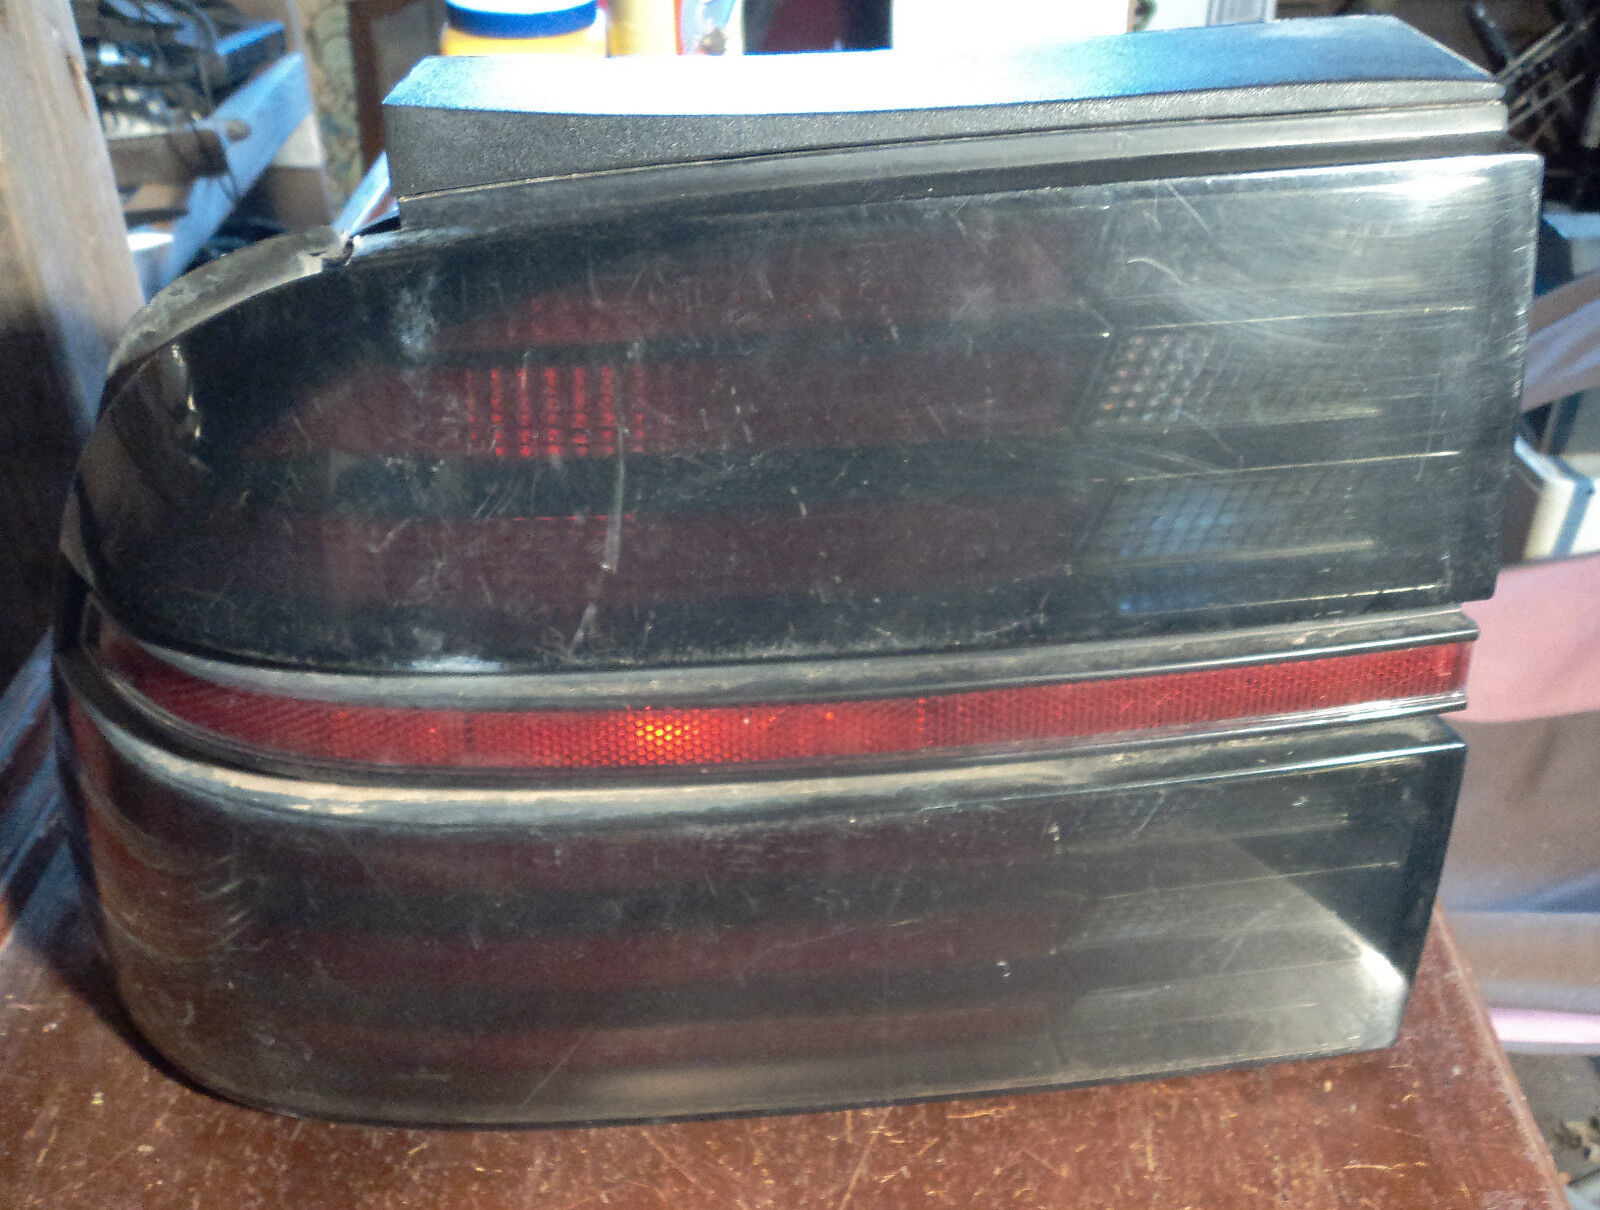 Primary image for 1989-1996 Chevy Beretta >< Taillight Assembly >< Left Side